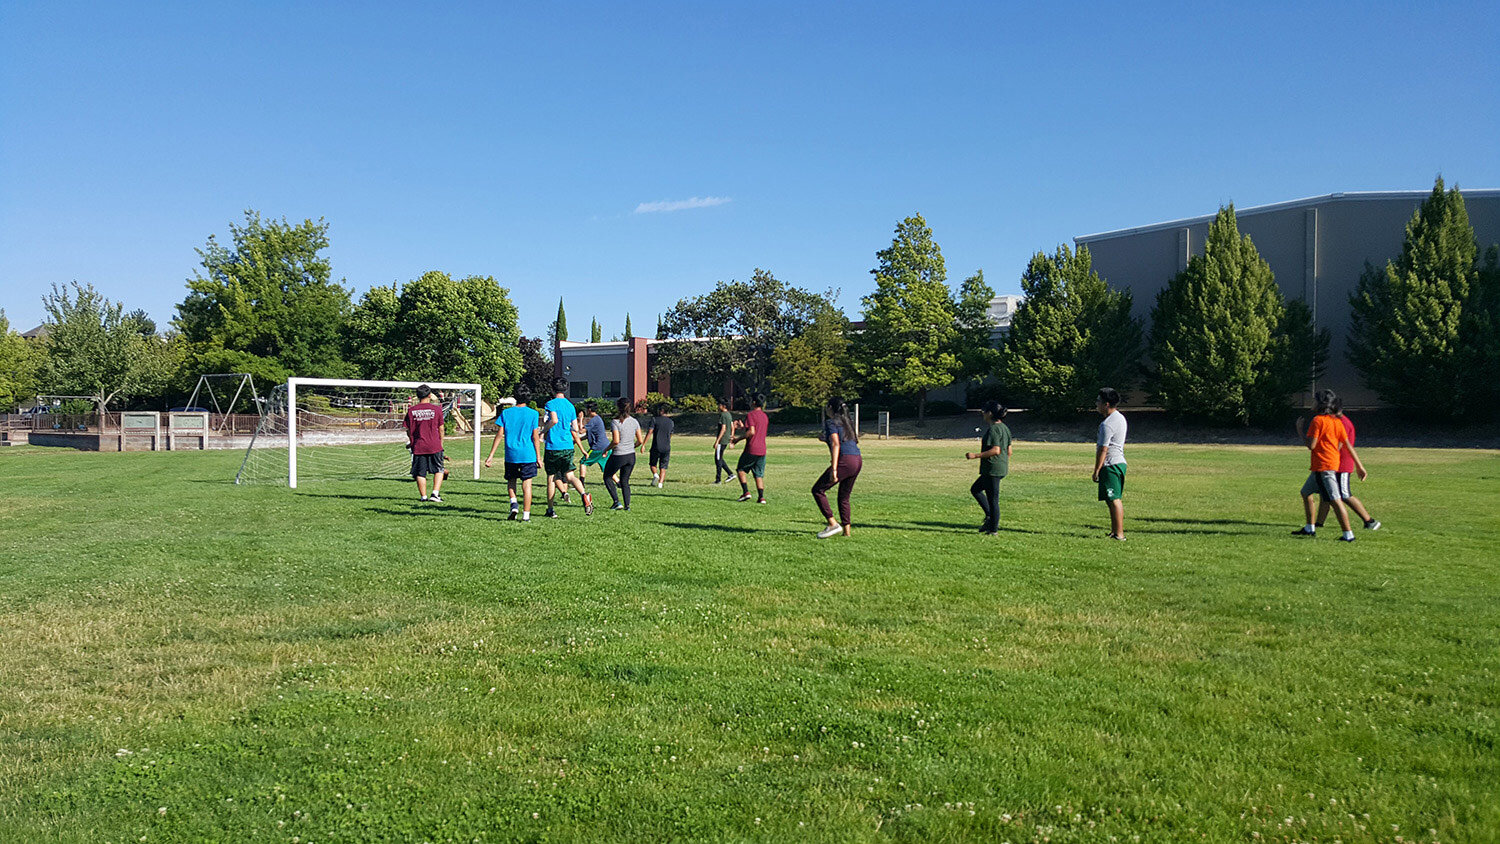  Life is More Than Test Scores: Soccer fills our Summer Days in Ashland 